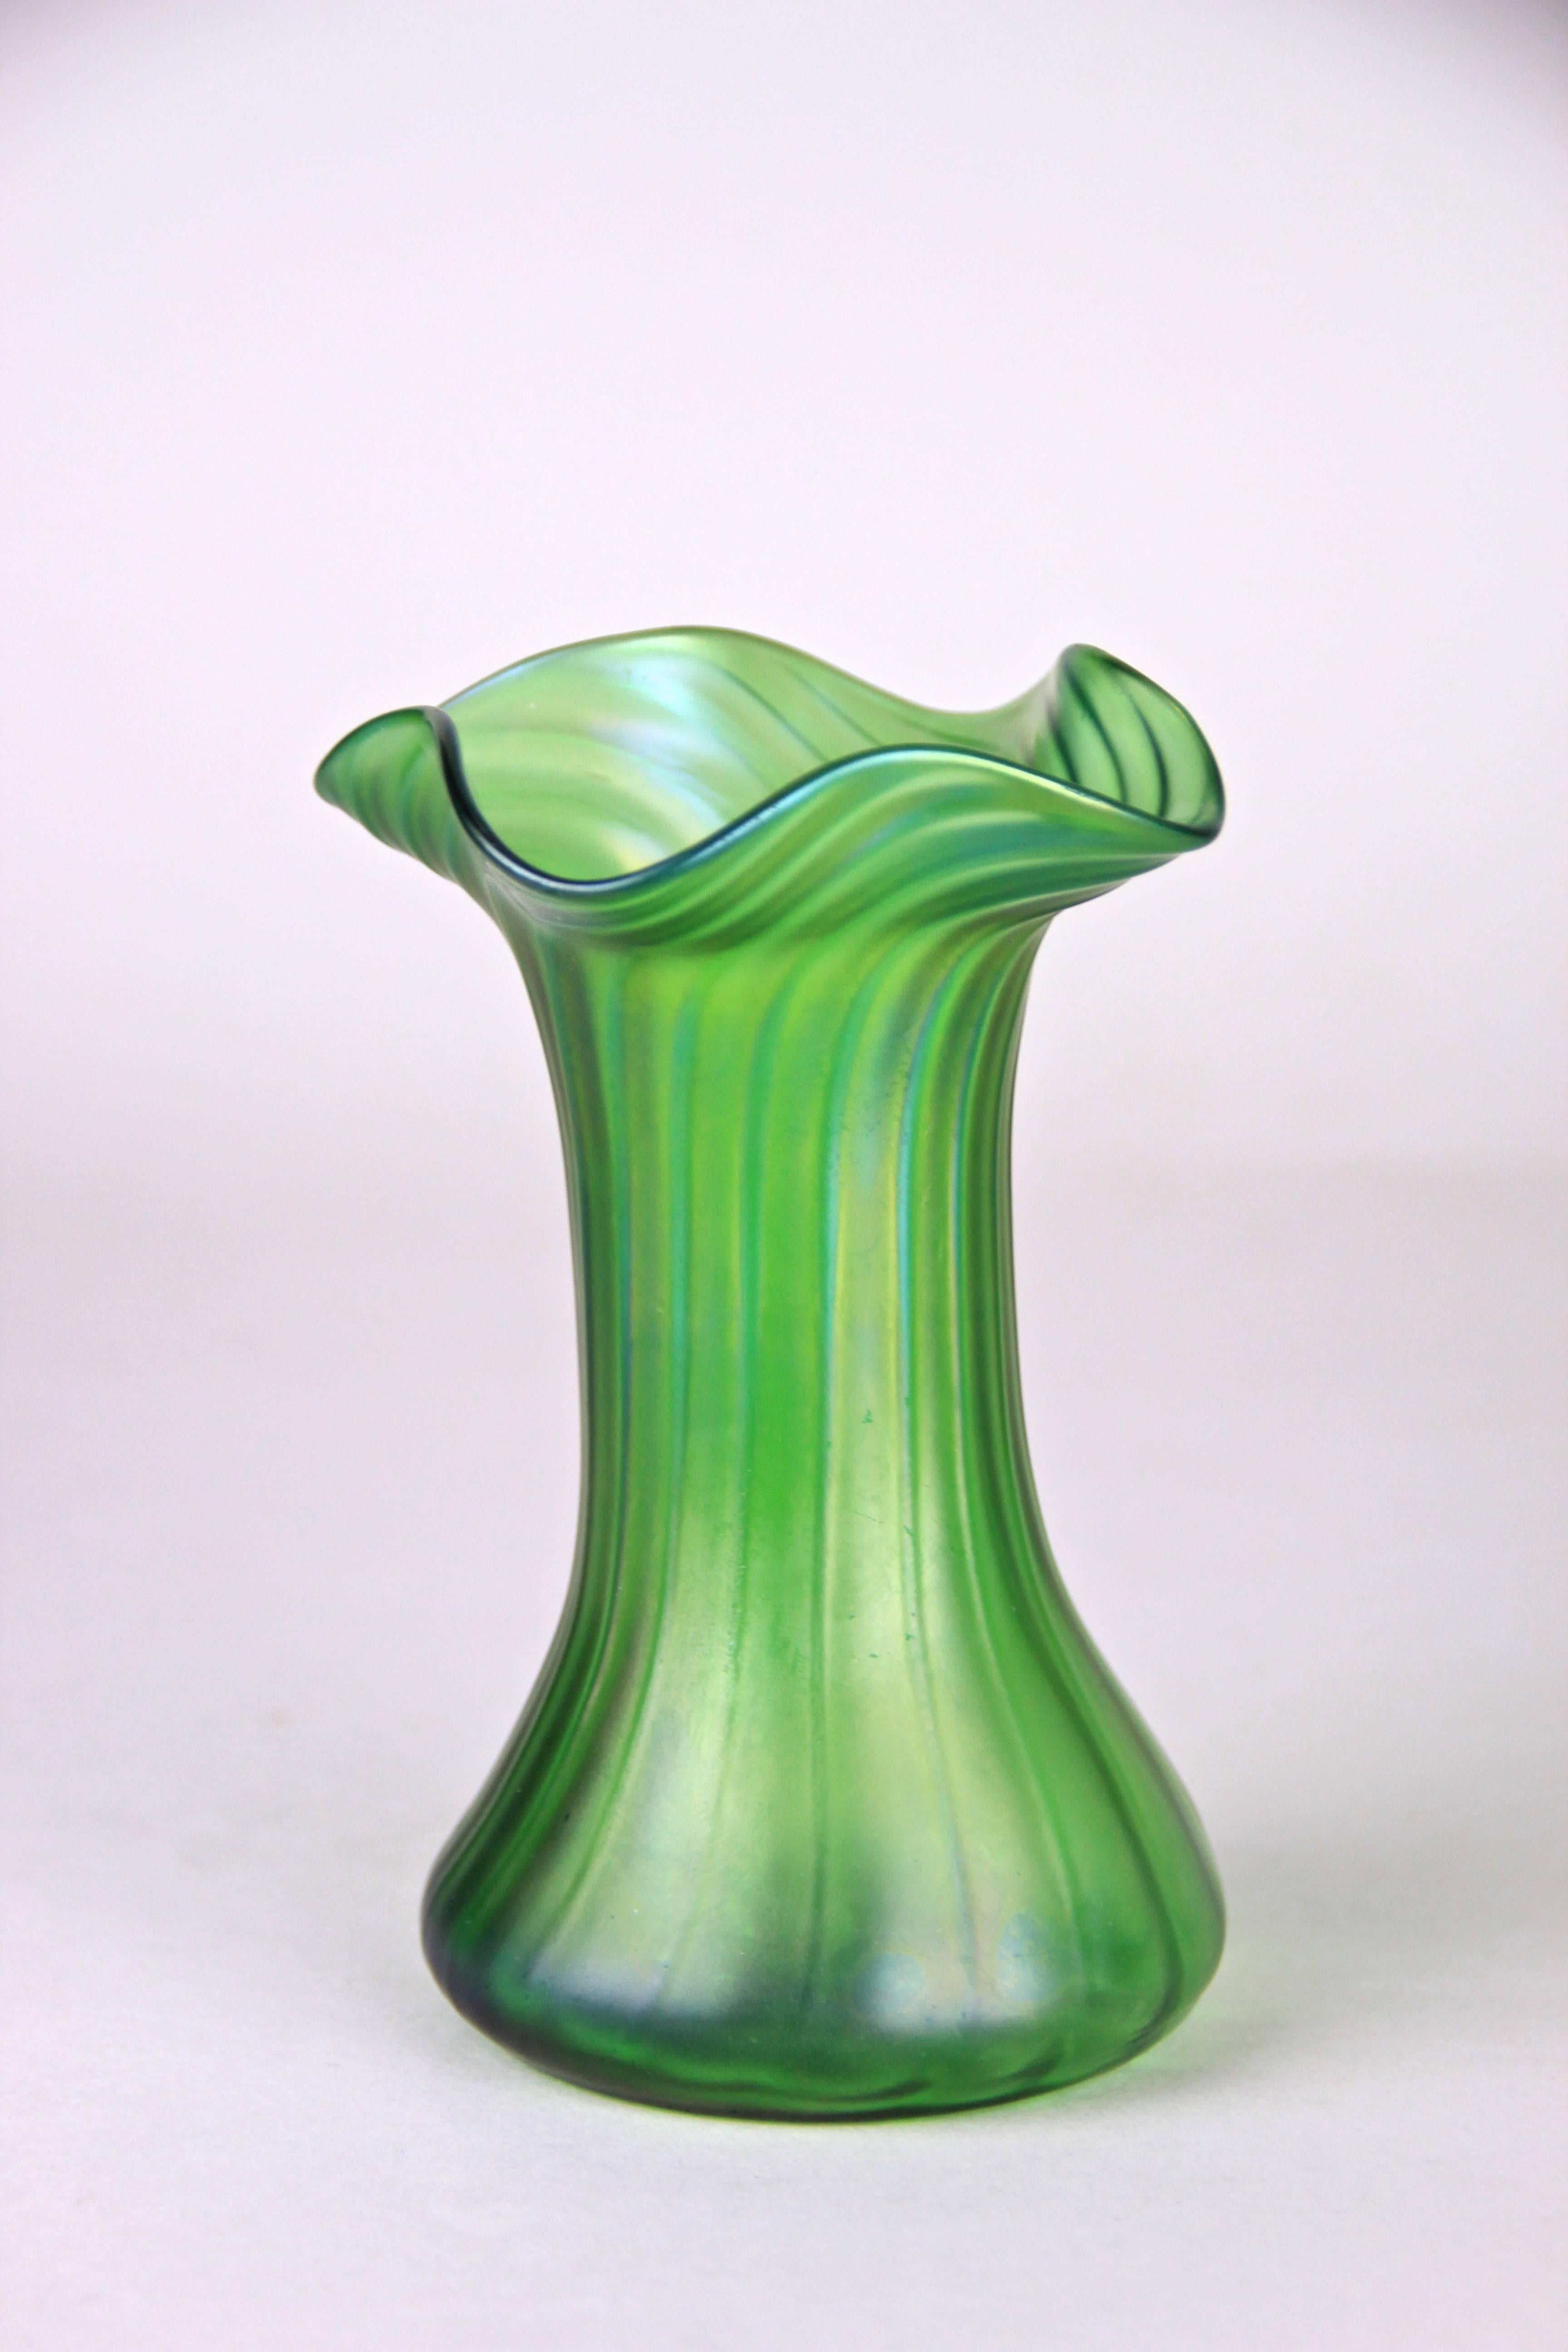 This lightly iridescent small Art Nouveau vase comes out of the famous Bohemian glass manufacture of Kralik. The iridescent design, well-known from other famous companies like for example Loetz Witwe, shimmers in beautiful colors from purple,